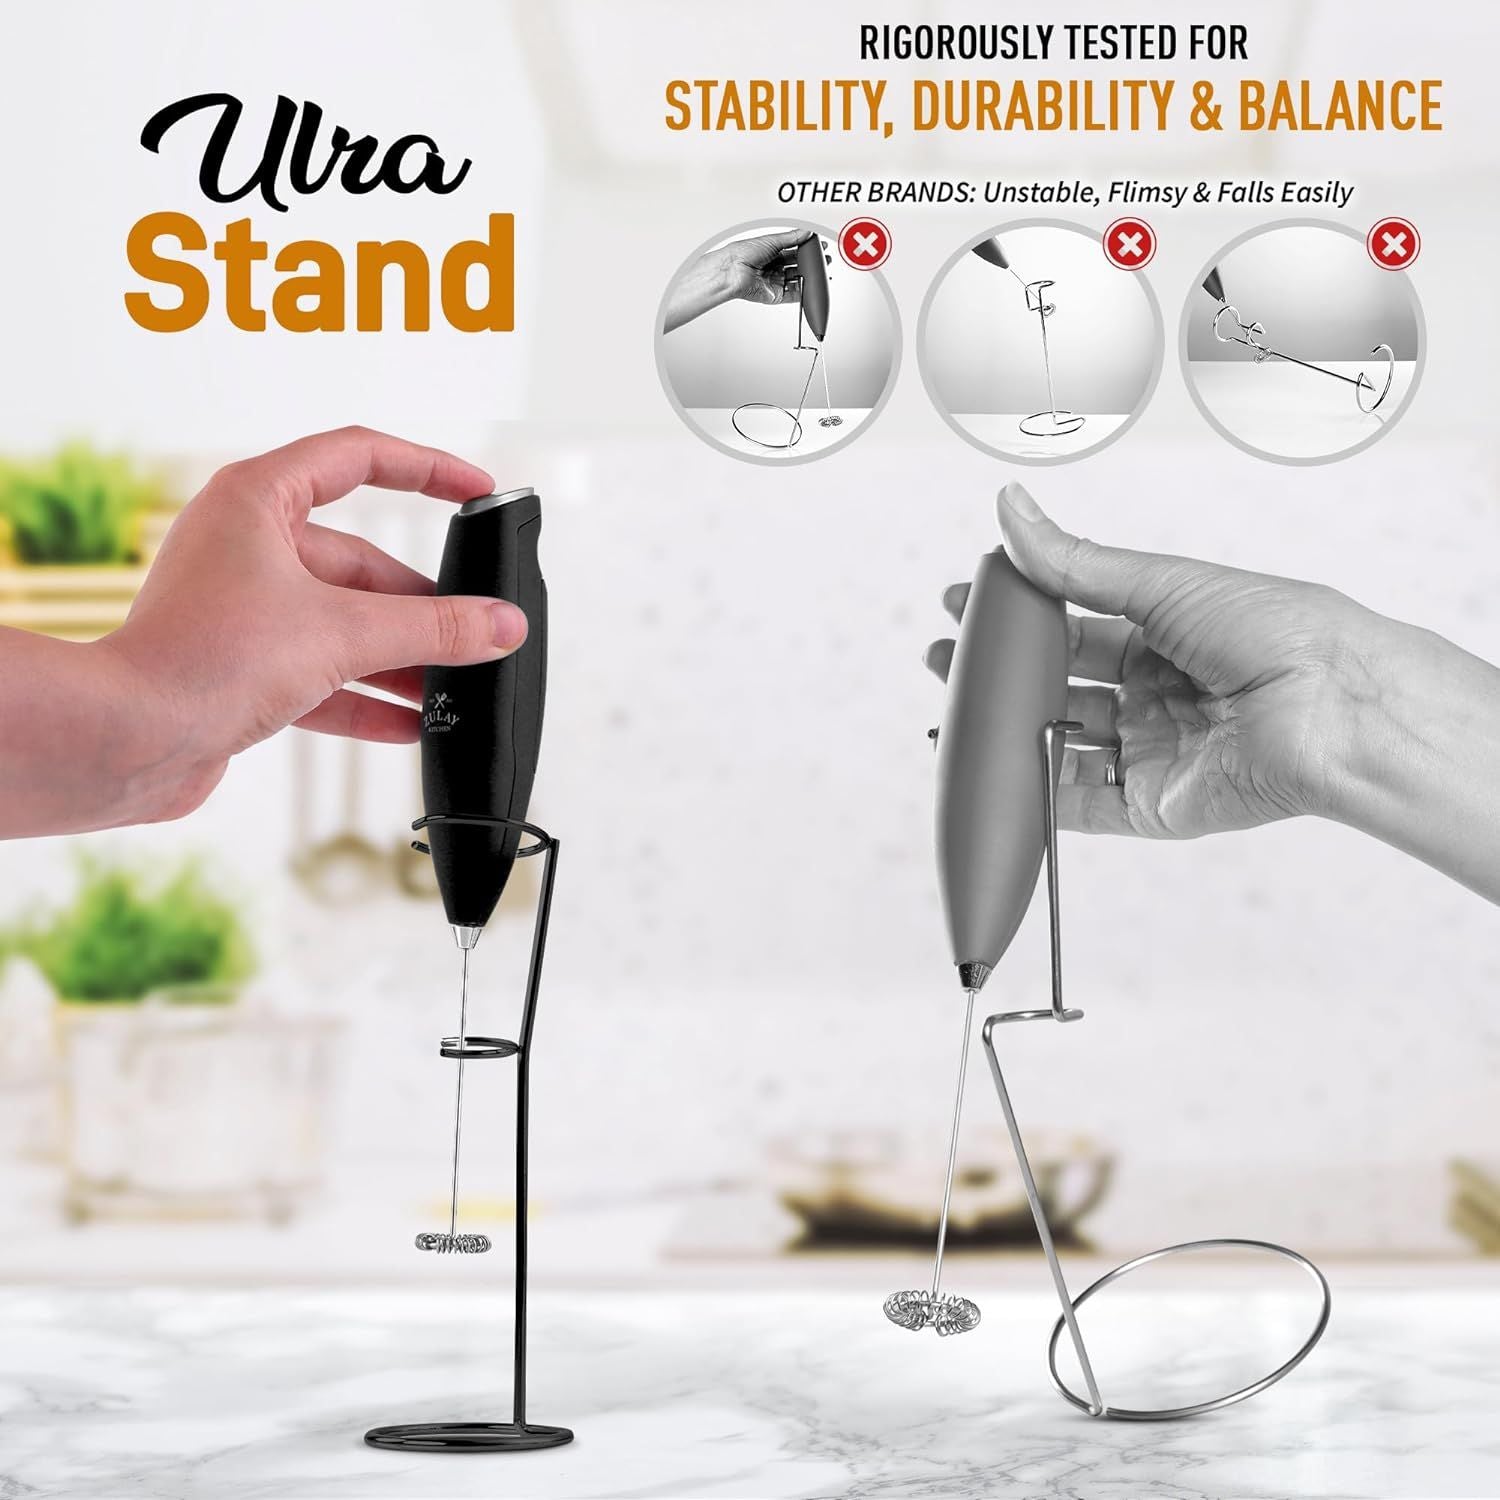 Original Frother Stand